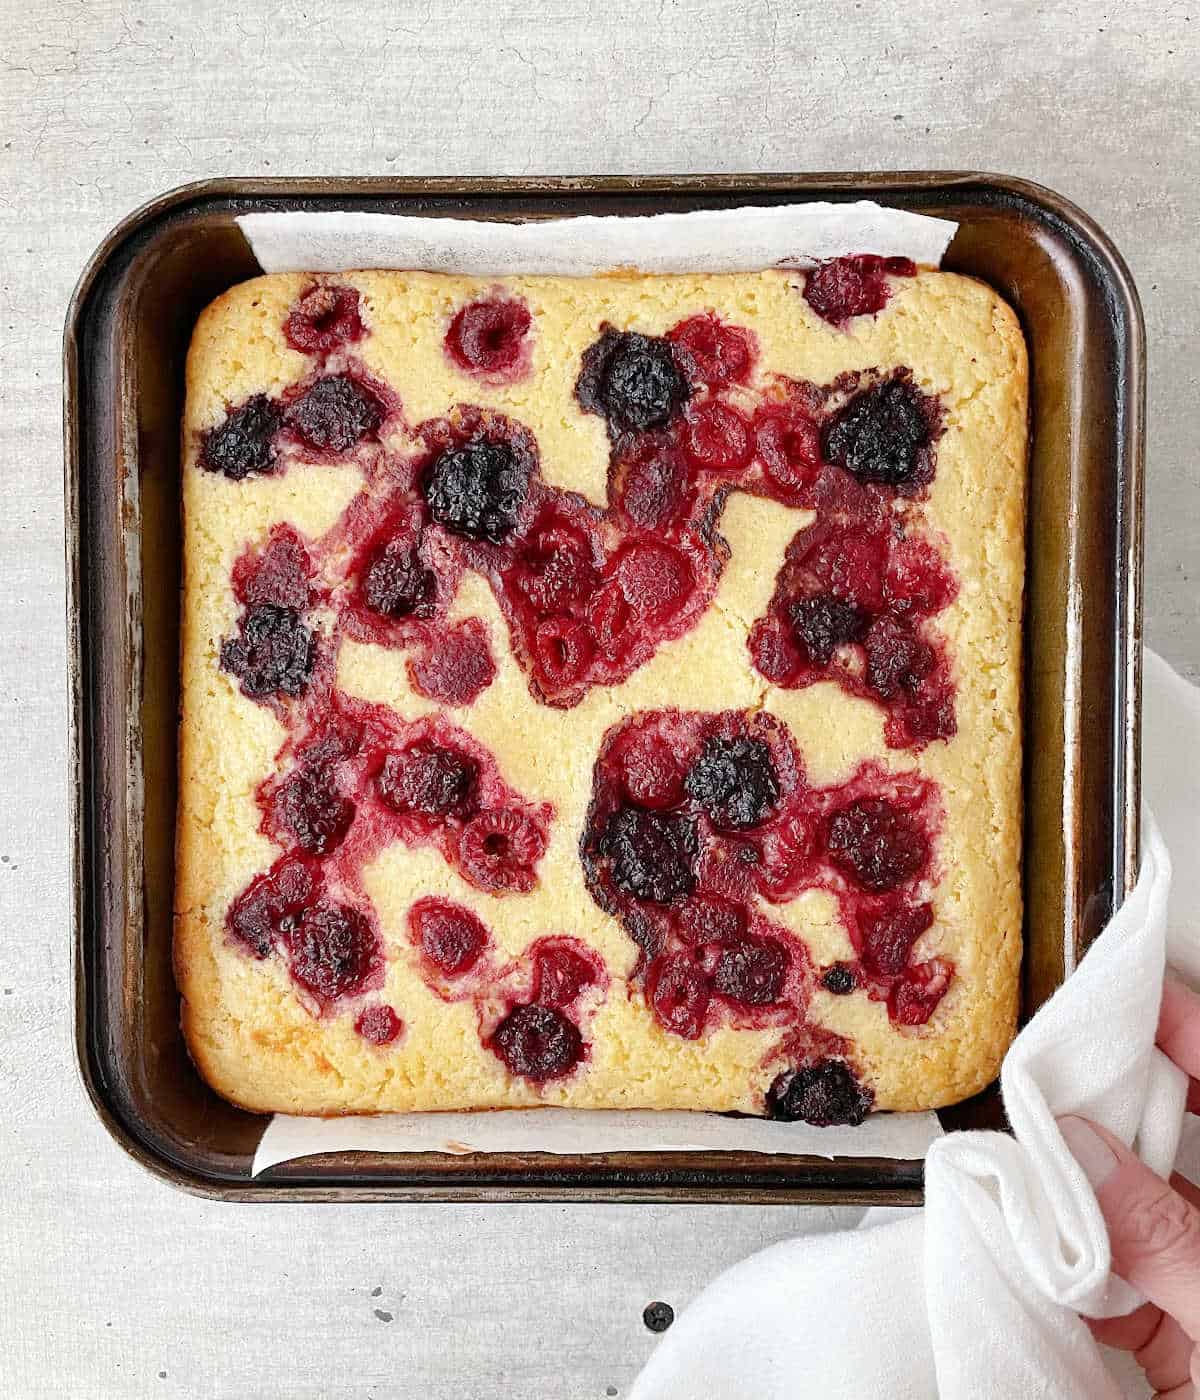 Hand holding baked ricotta cake with berries on dark metal square pan on grey surface.